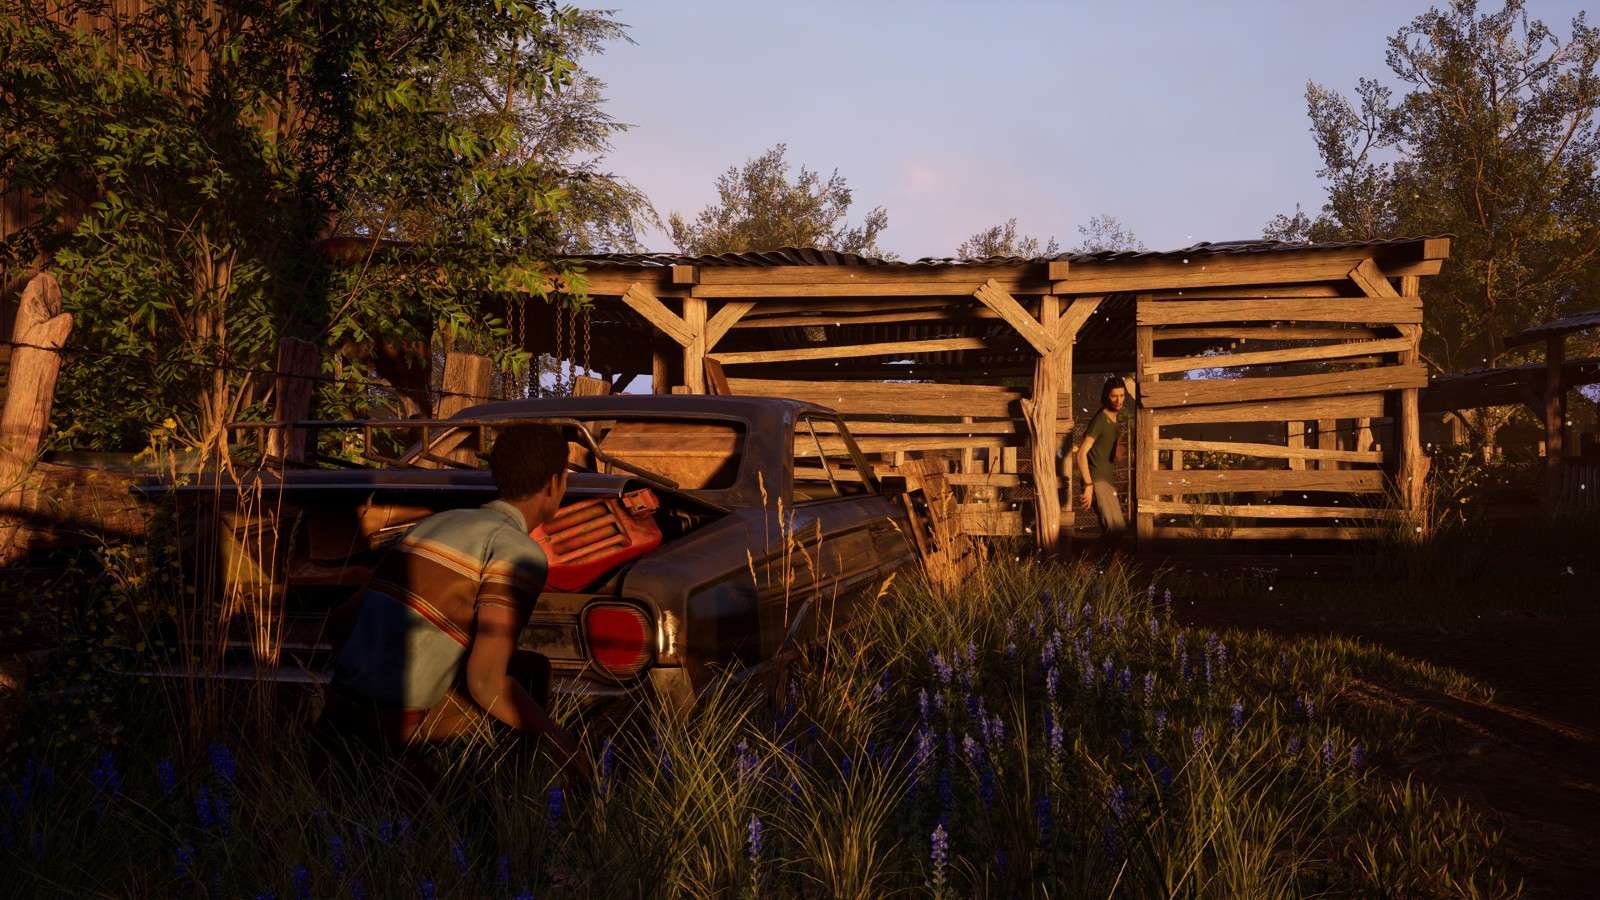 A screenshot from The Texas Chain Saw Massacre game featuring a victim hiding from a killer.